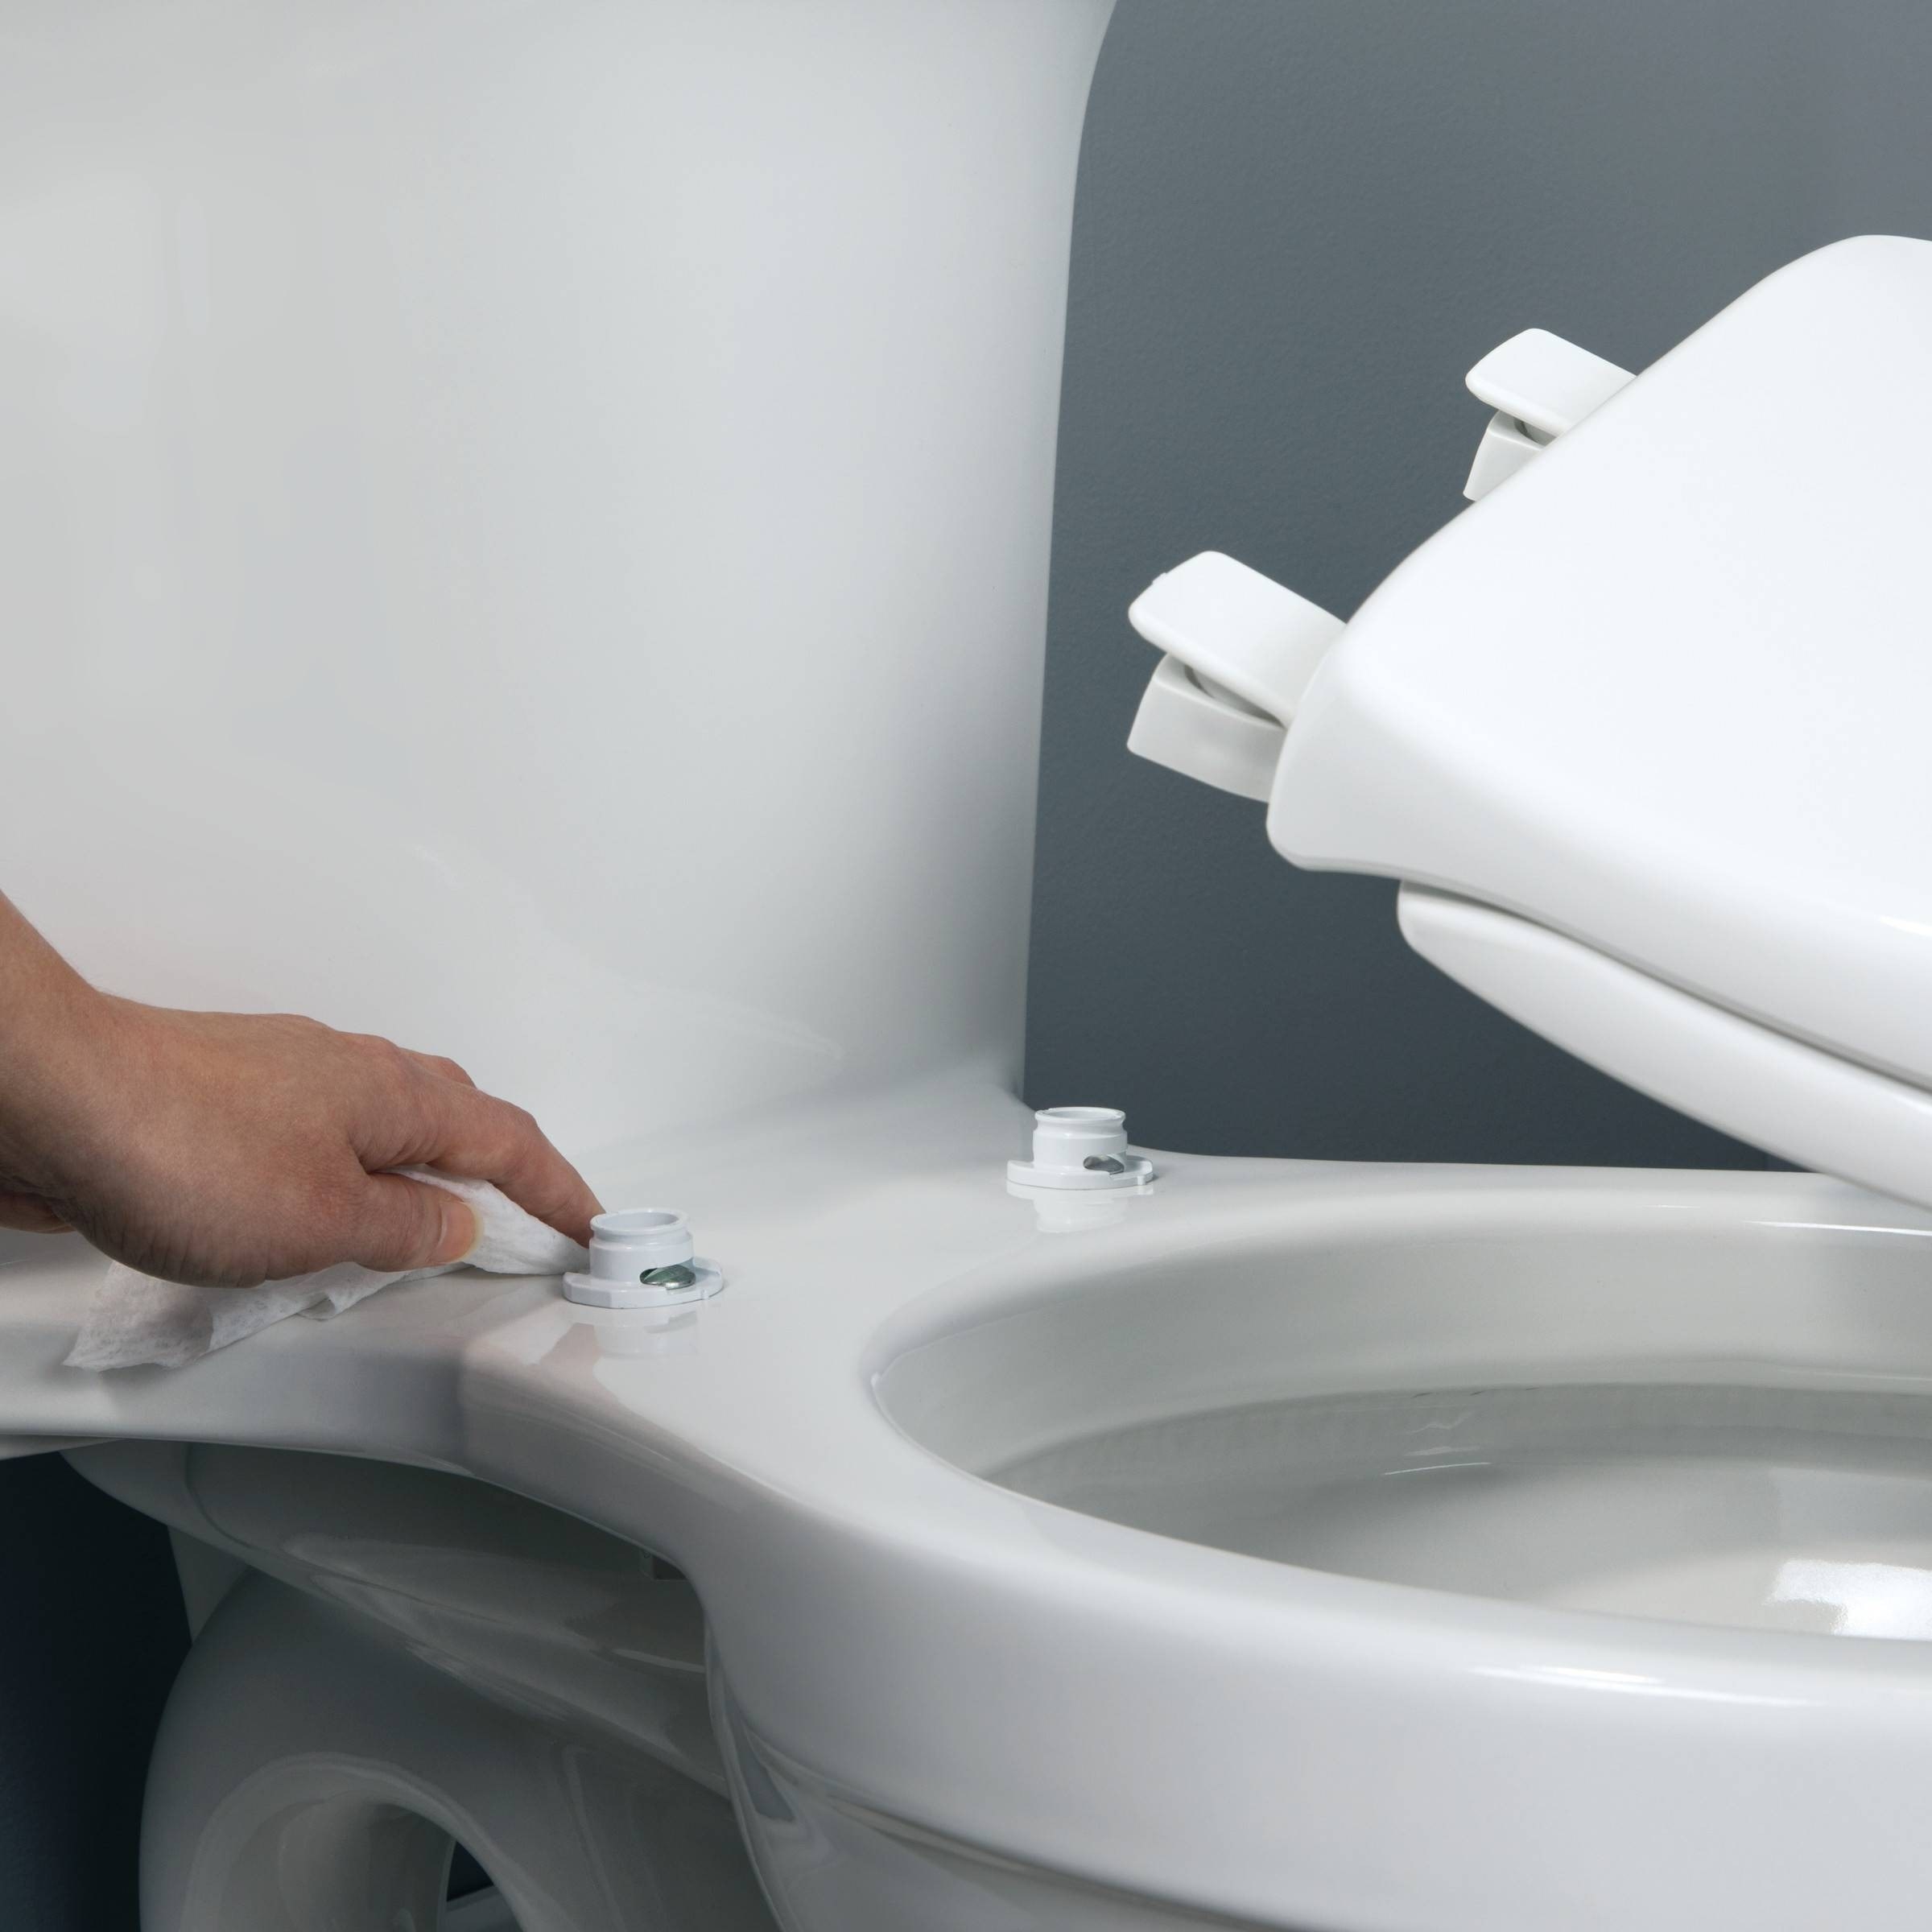 a hand installing the new toilet seat